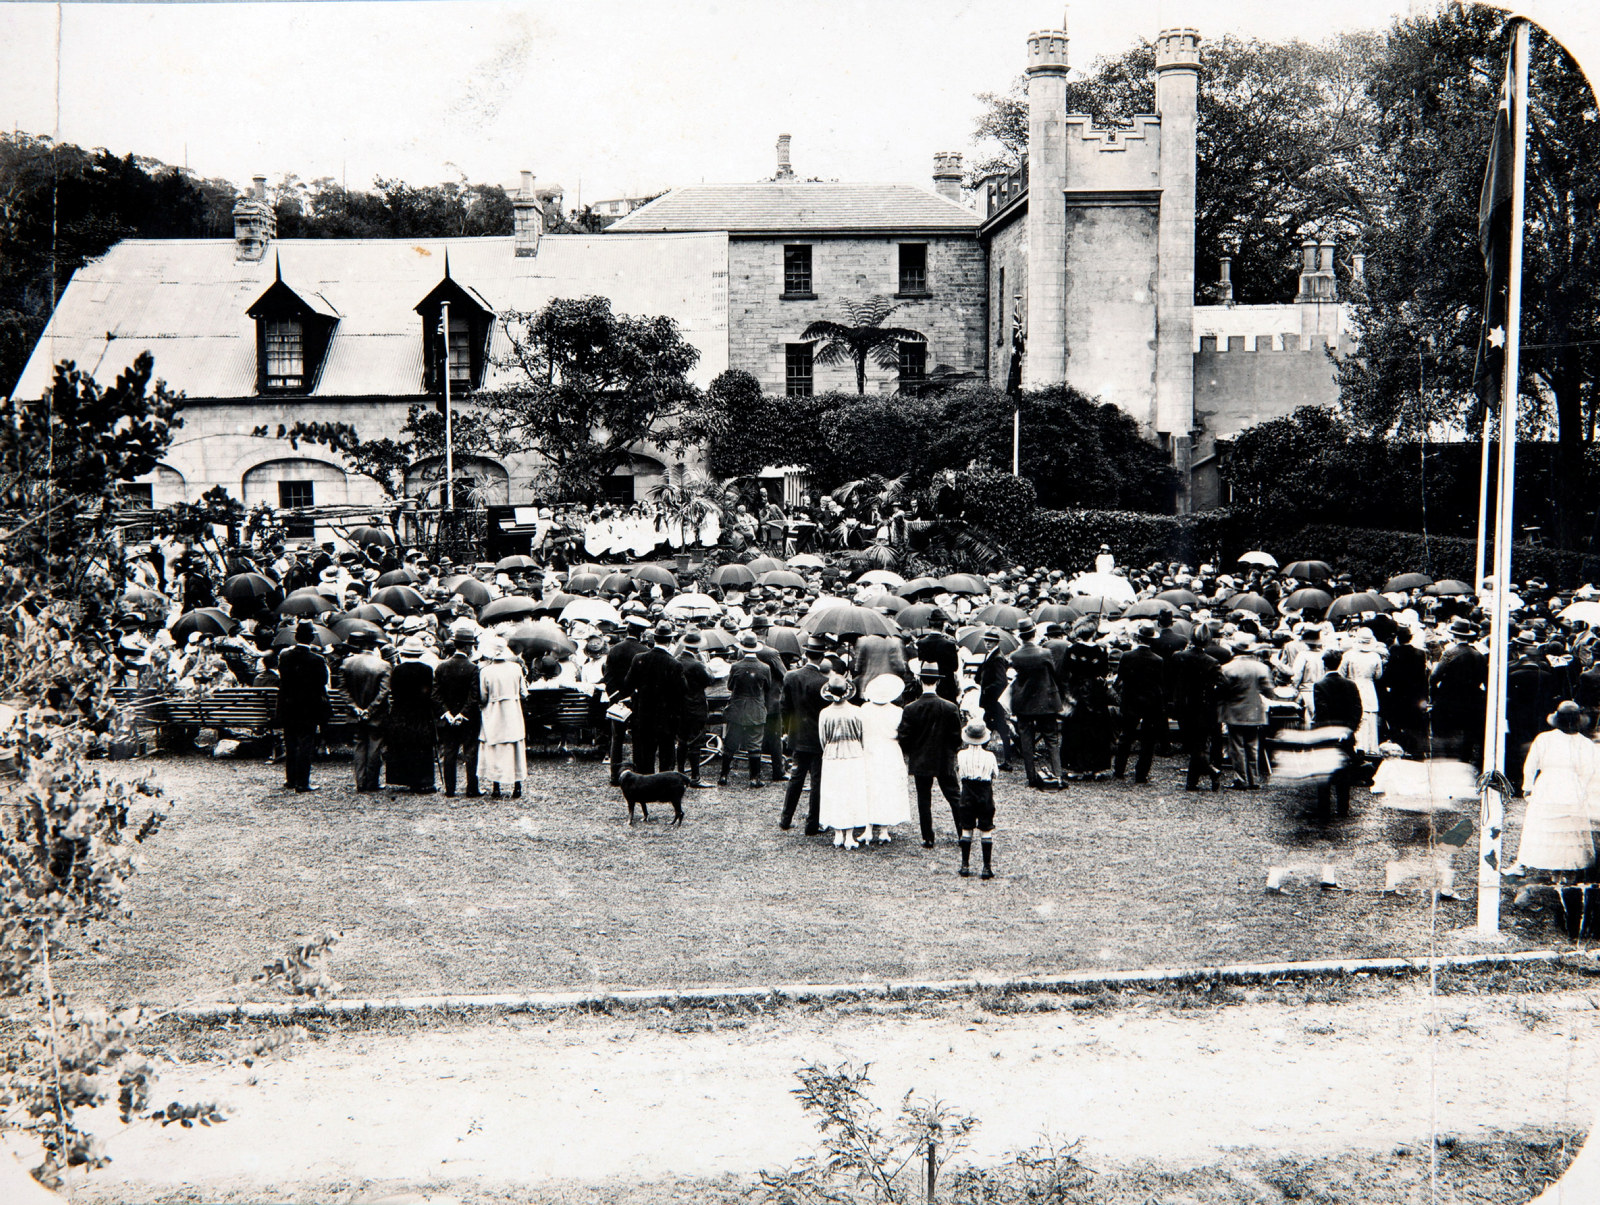 Annual celebration at Vaucluse House 23 October1922, from 'Nielsen-Vaucluse Park Trust' photograph album, no.2.